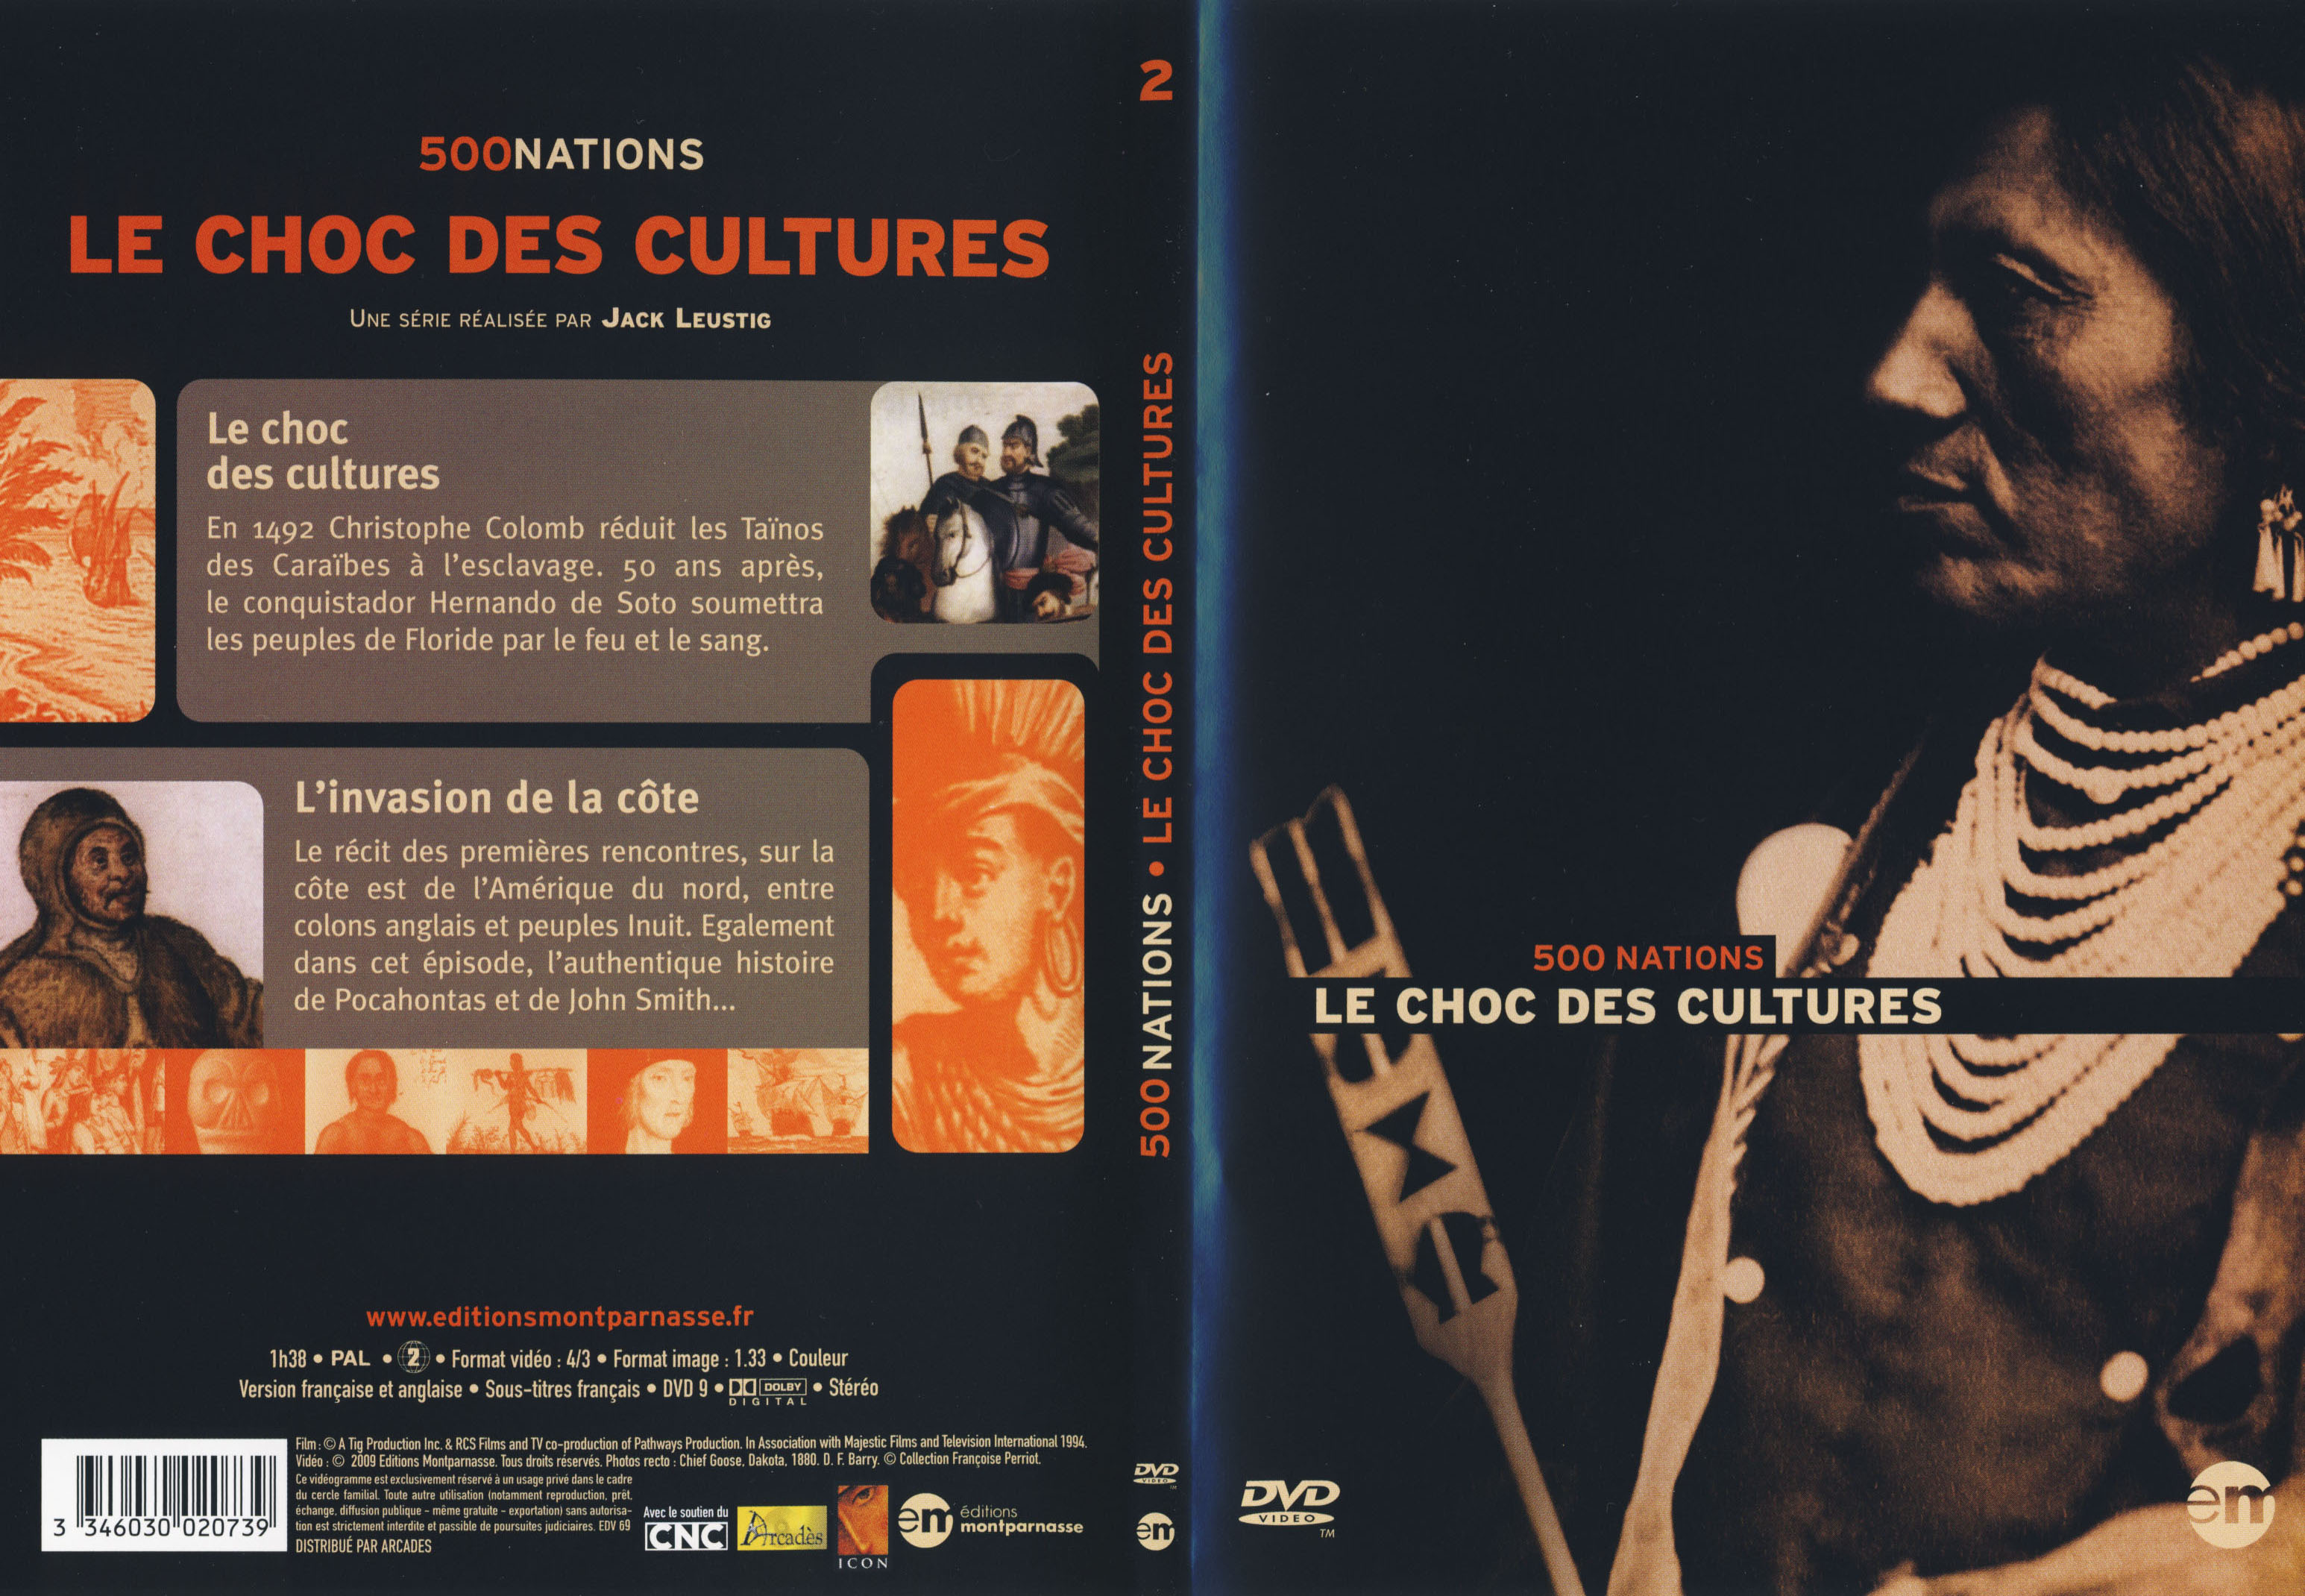 Jaquette DVD 500 nations DVD 2